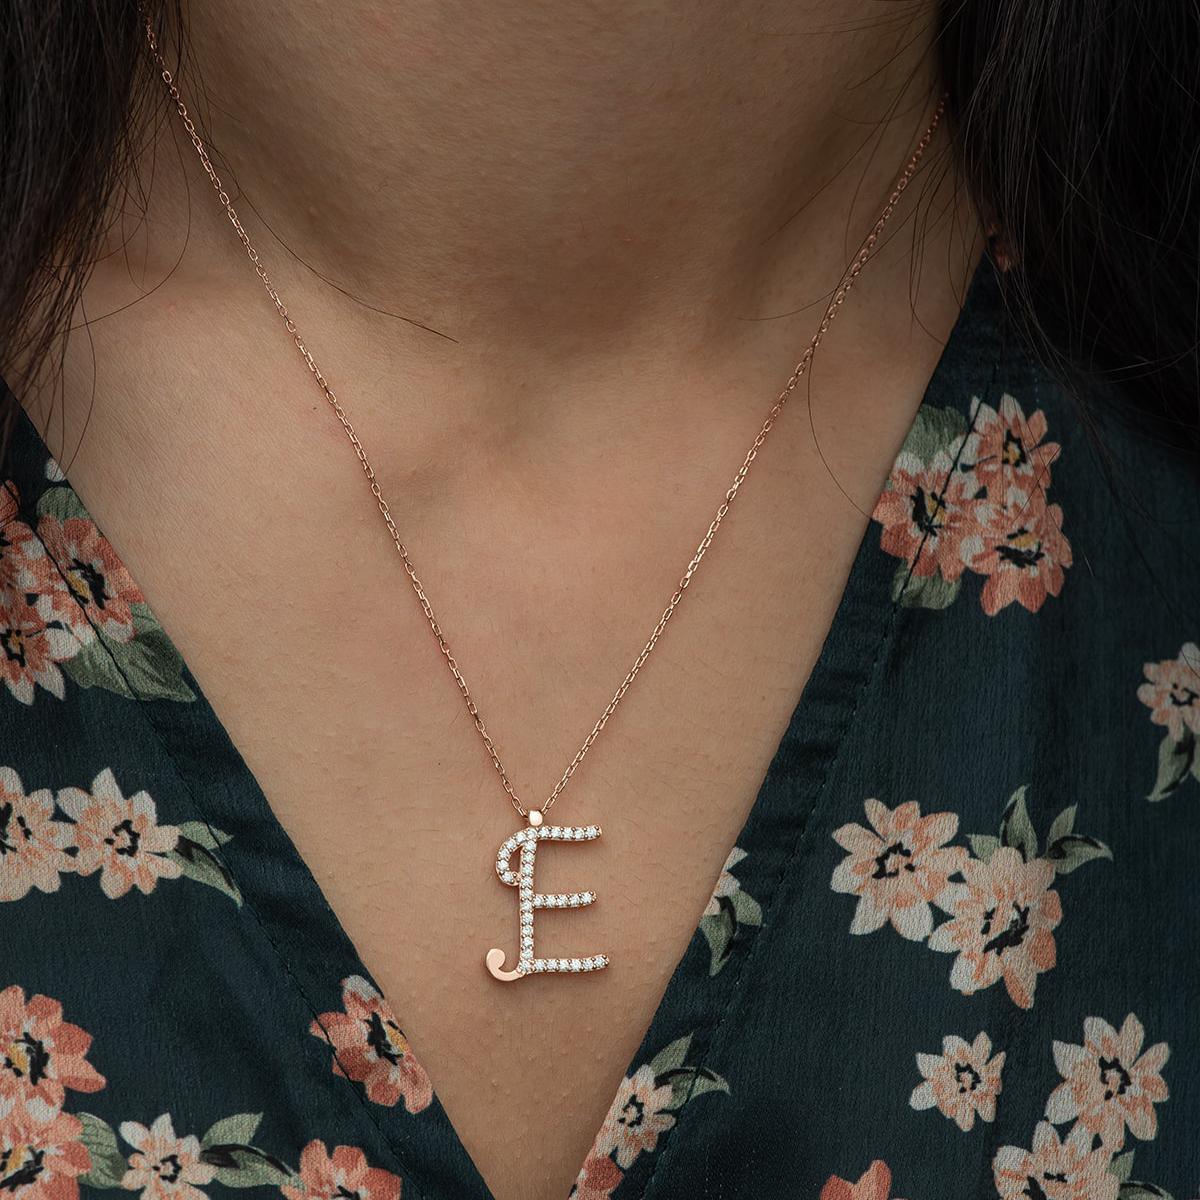 E Initial Necklace Gold • E Letter Necklace Diamond • Gift For Her - Trending Silver Gifts